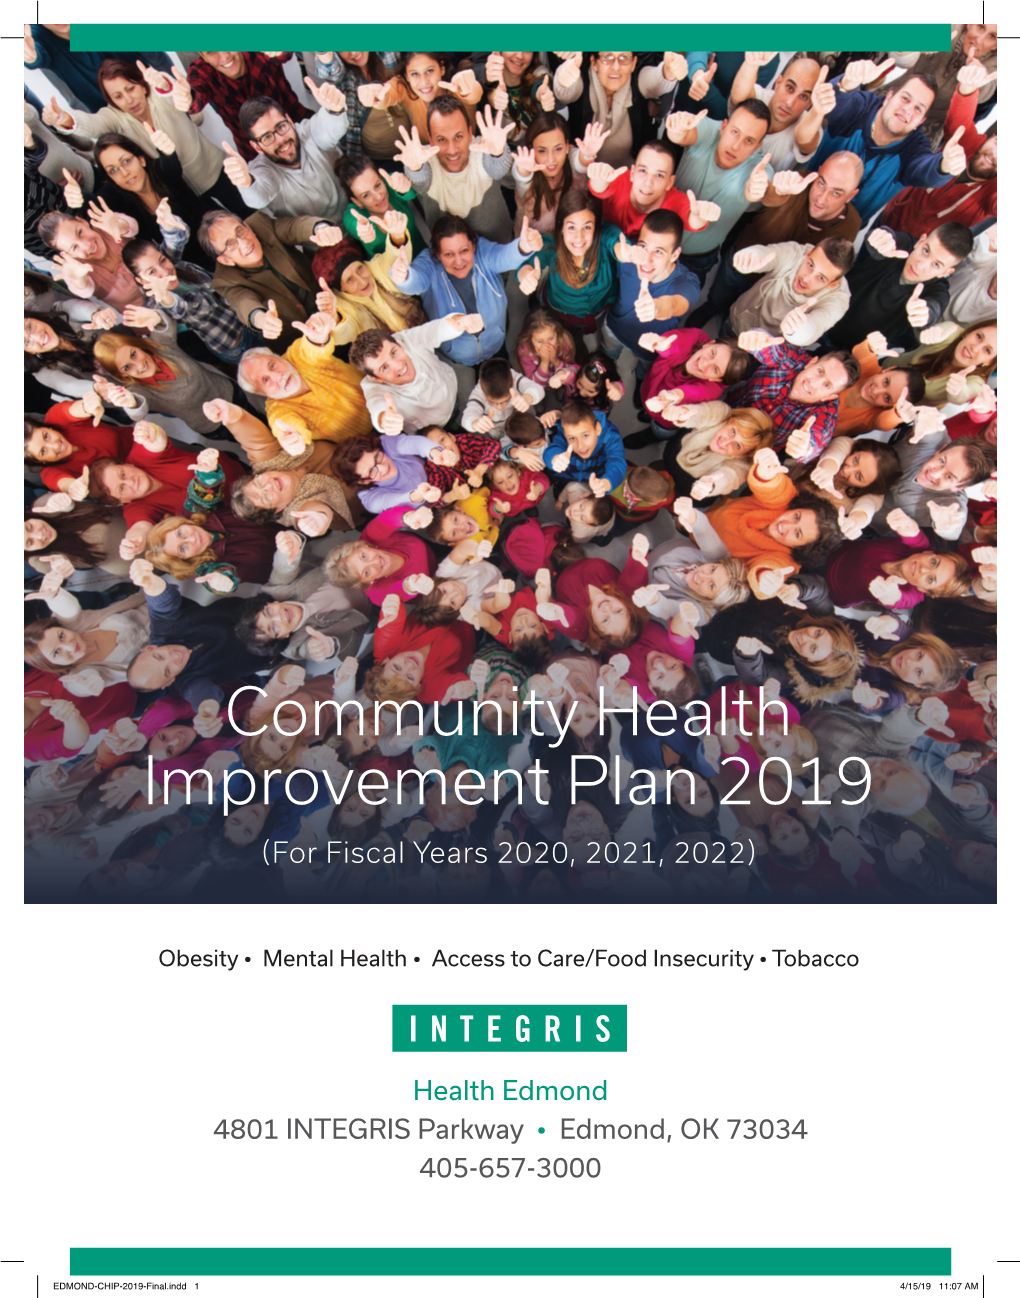 Community Health Improvement Plan 2019 (For Fiscal Years 2020, 2021, 2022)